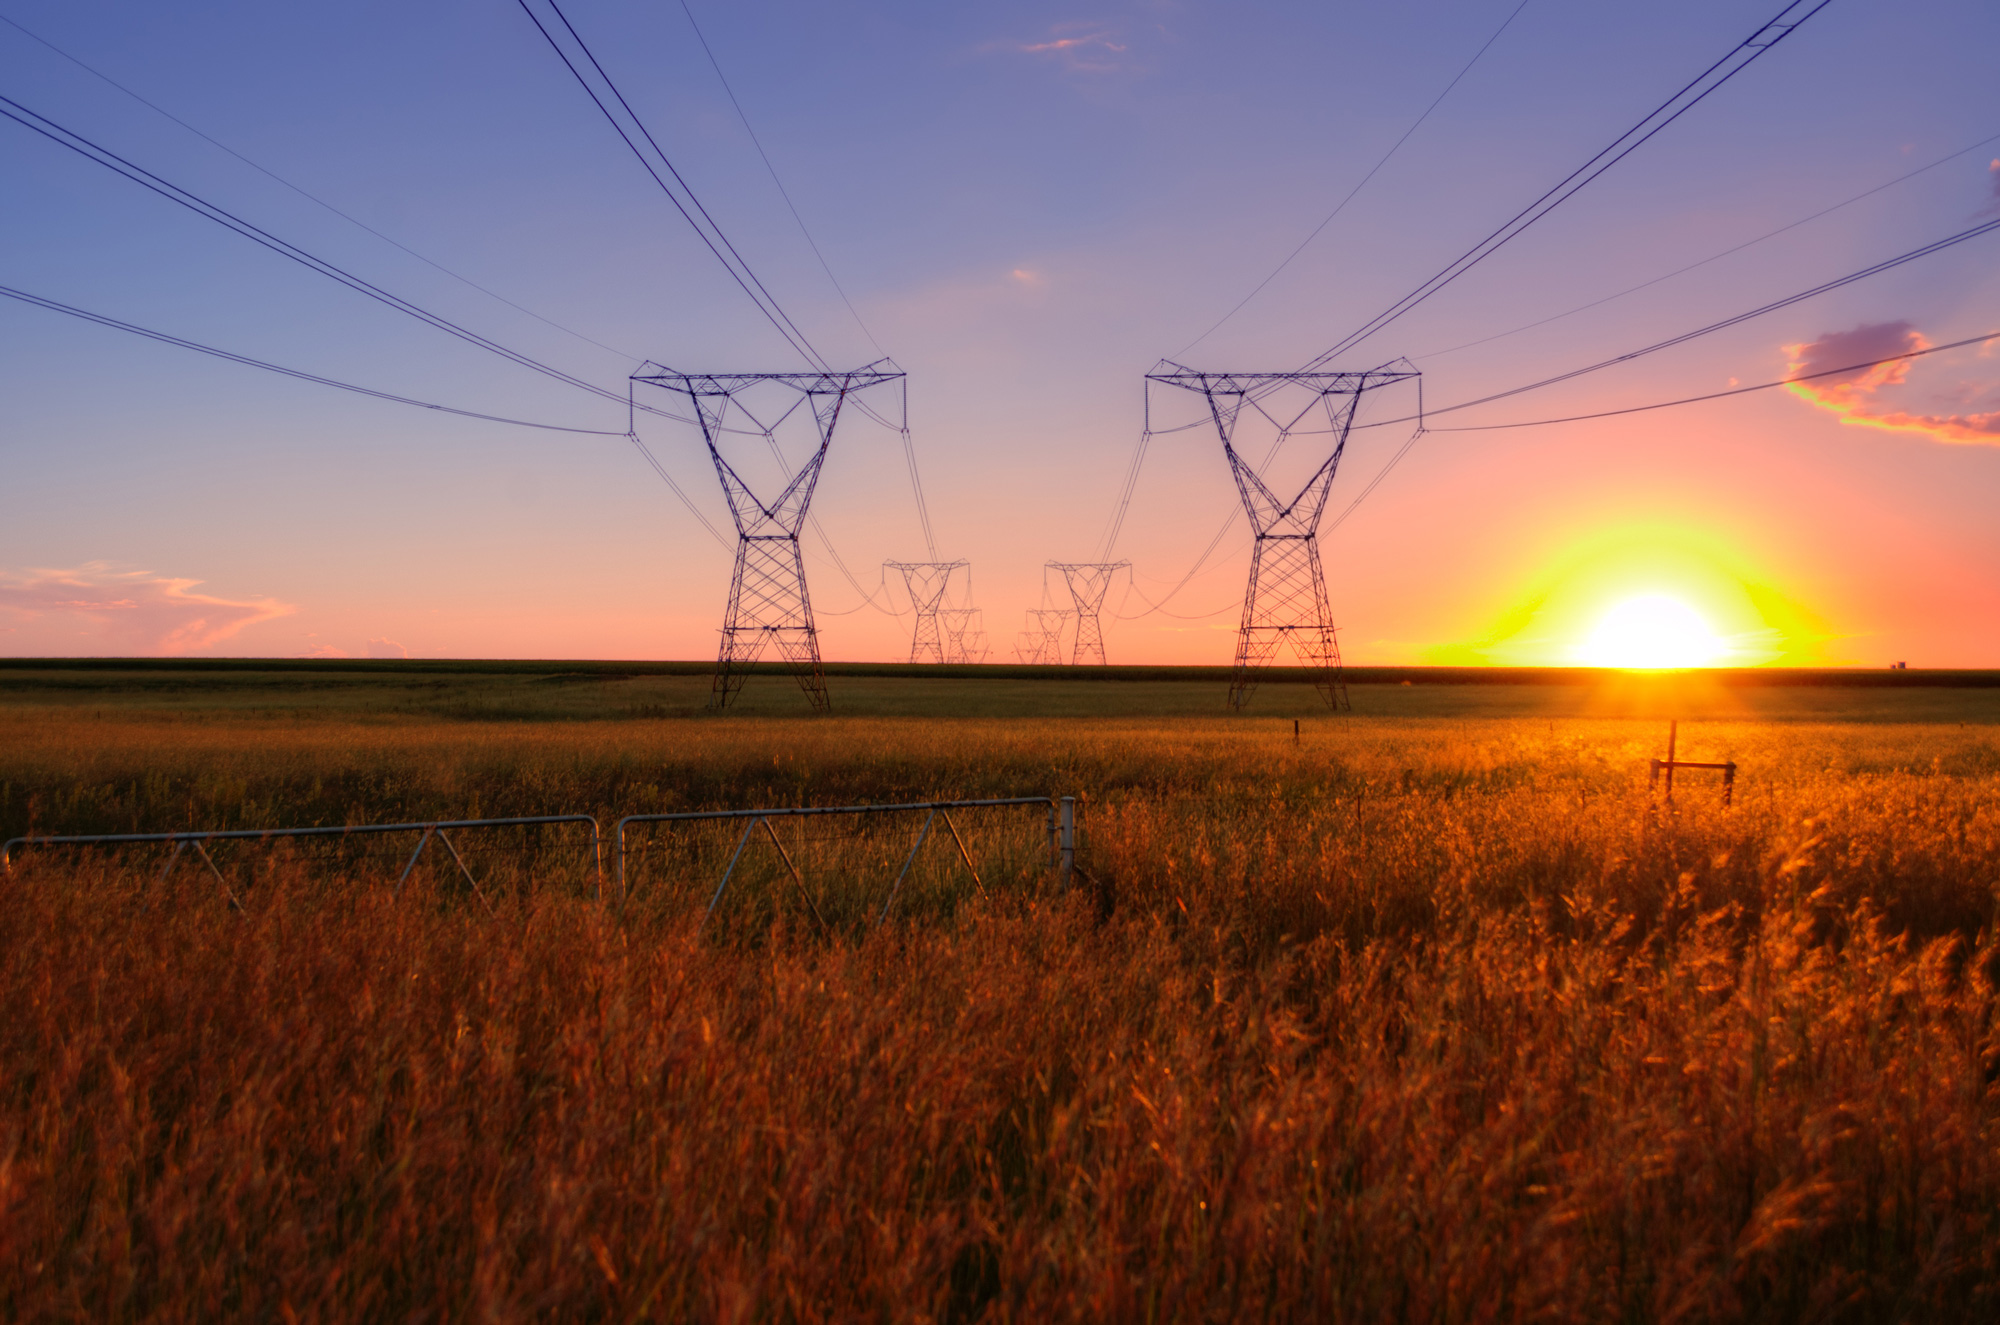 EAC to provide 7,480 megawatts of electricity by 2022